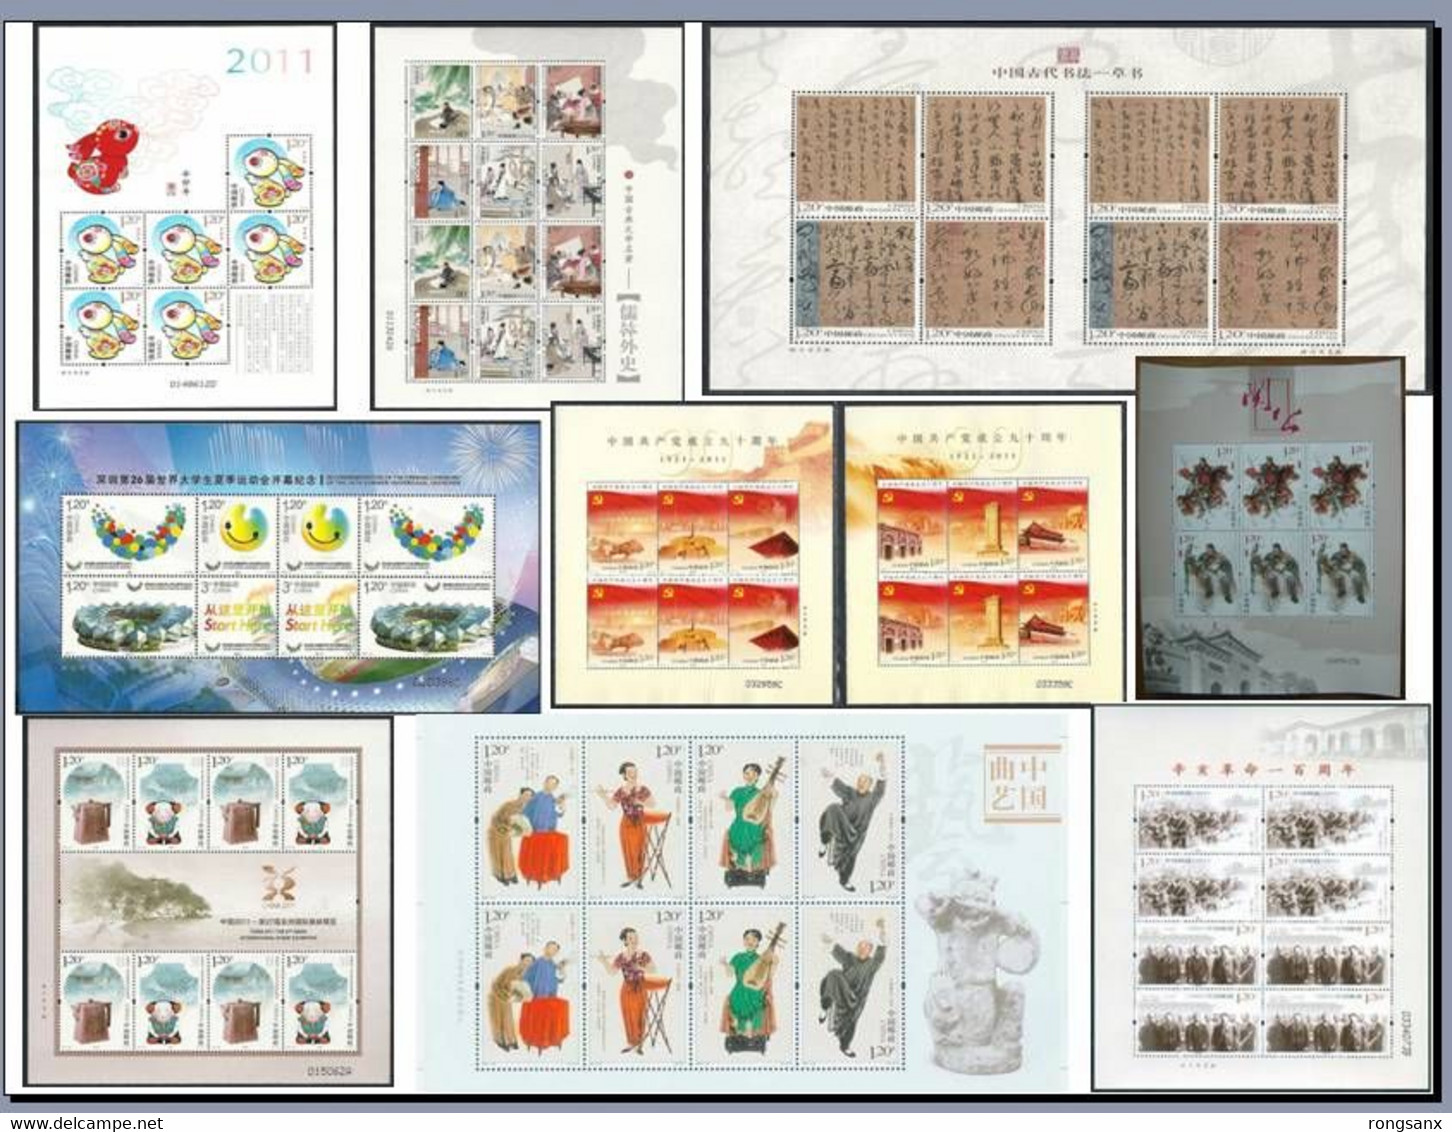 CHINA 2011 YEAR PACK INCLUDE 9 SHEETLT SEE PICS - Annate Complete